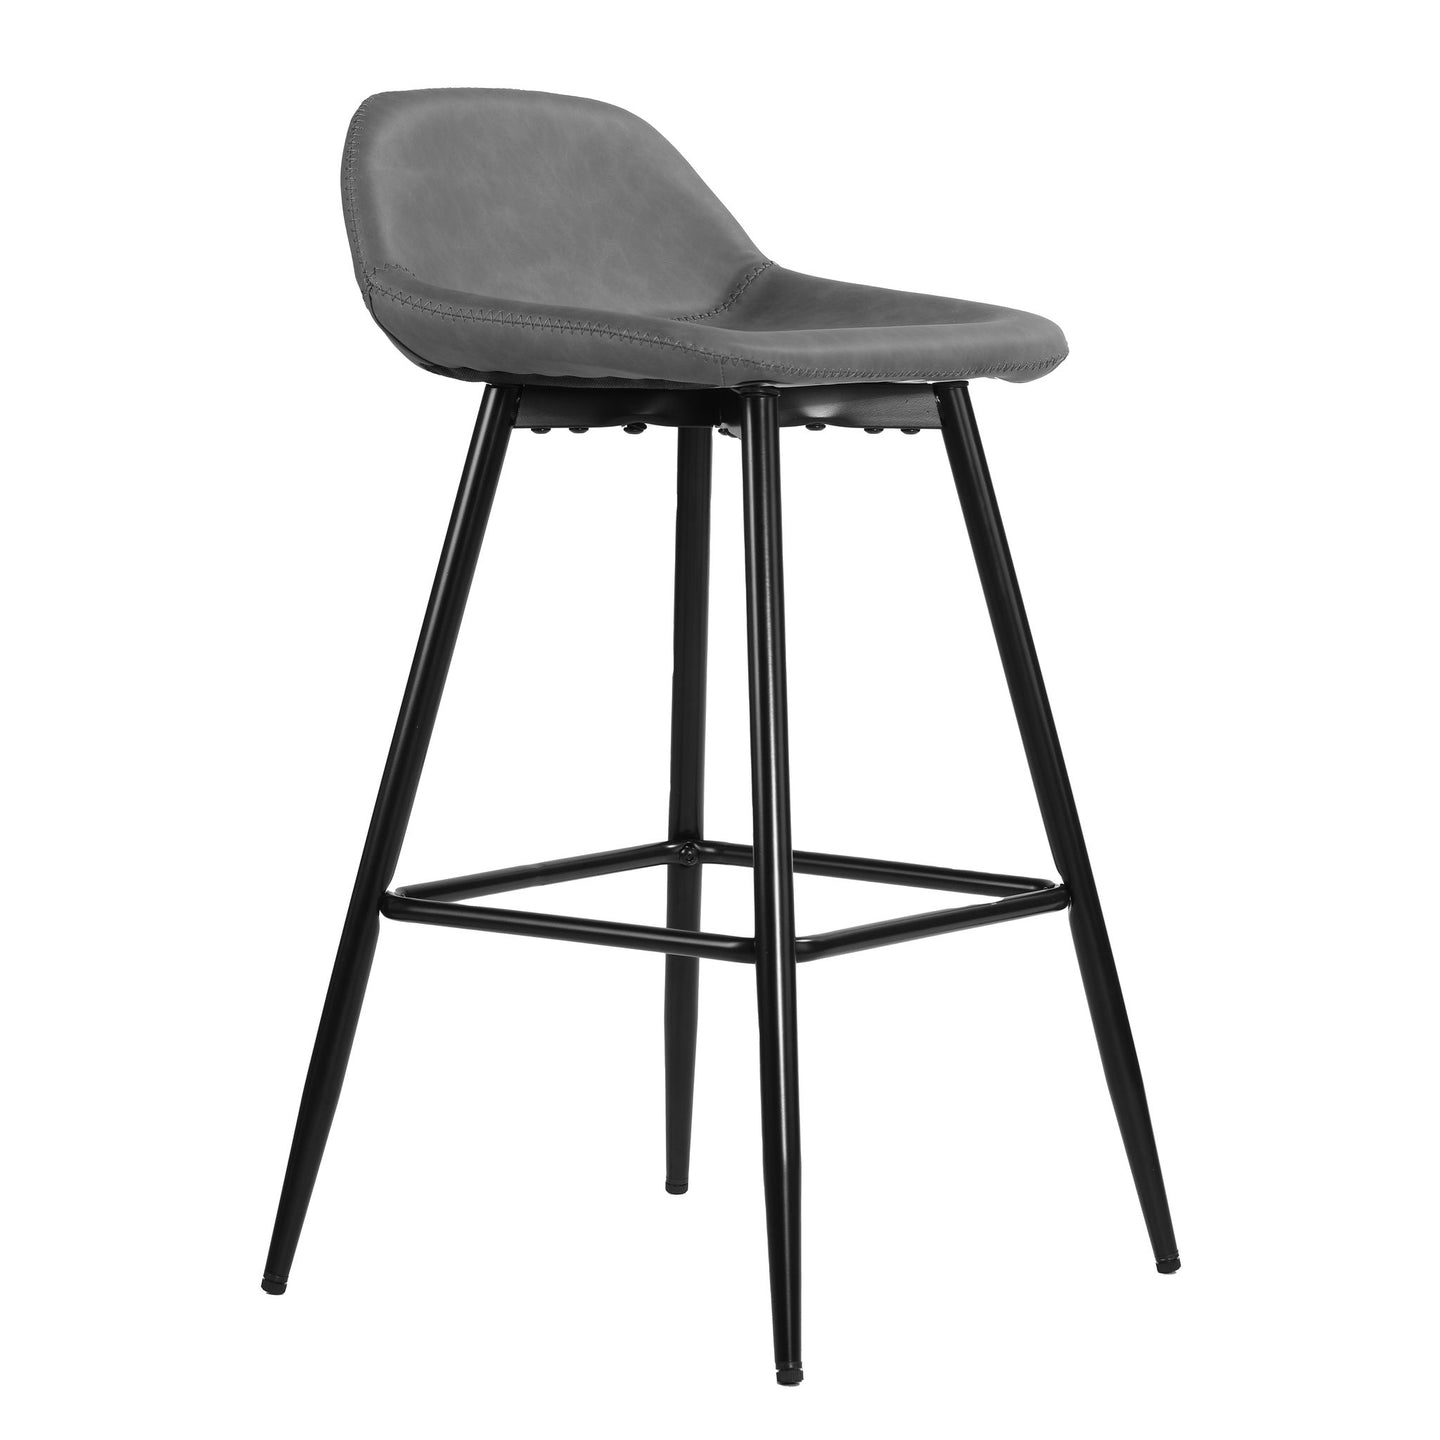 Cortesi Home Rain Counterstools in Light Grey Faux Leather, Black Base (Set of 2)